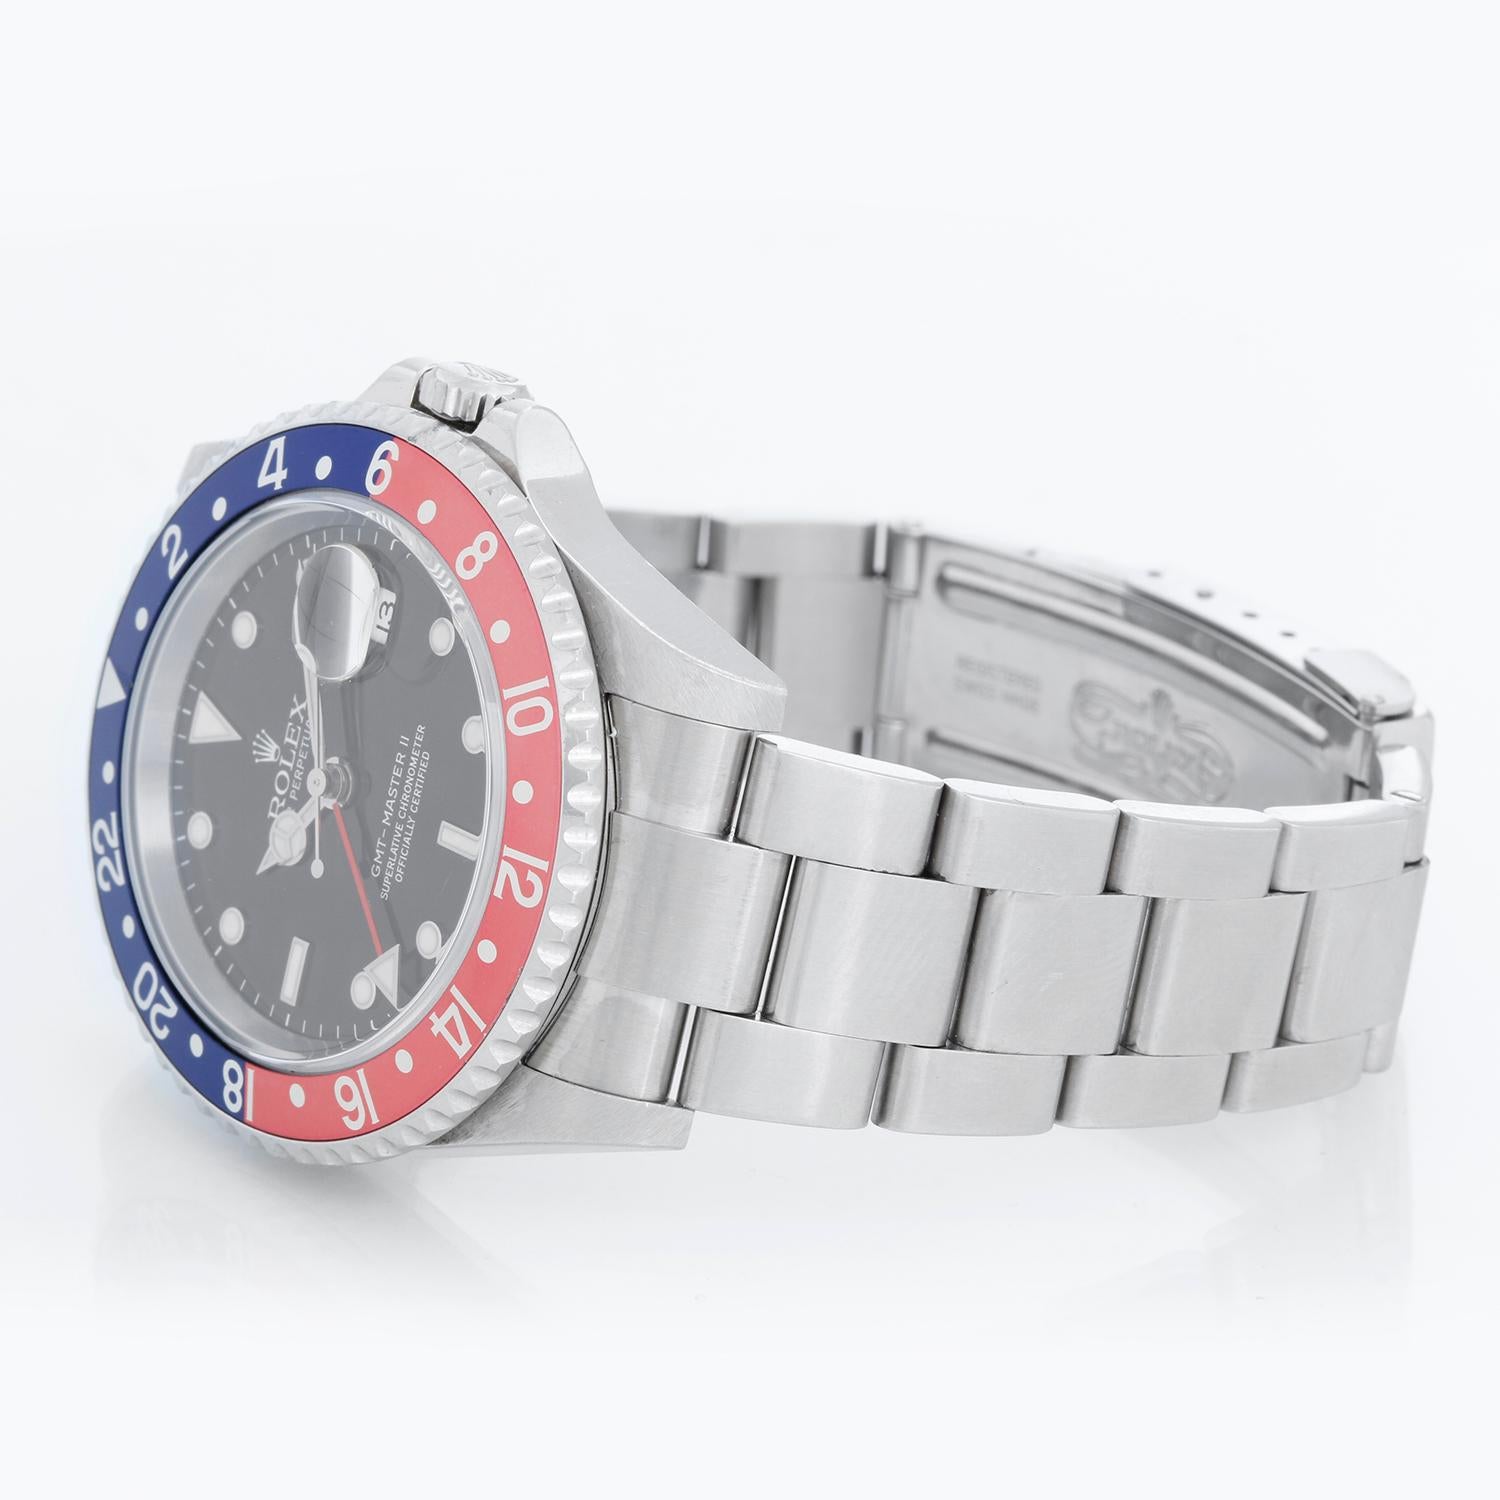 Men's Rolex GMT-Master II Watch 16710 - Automatic winding, 31 jewels, Quickset, sapphire crystal. Stainless steel case; rotating bezel comes with Pepsi bezel and extra black insert ( 40 mm ). Black dial with luminous style markers. Stainless steel